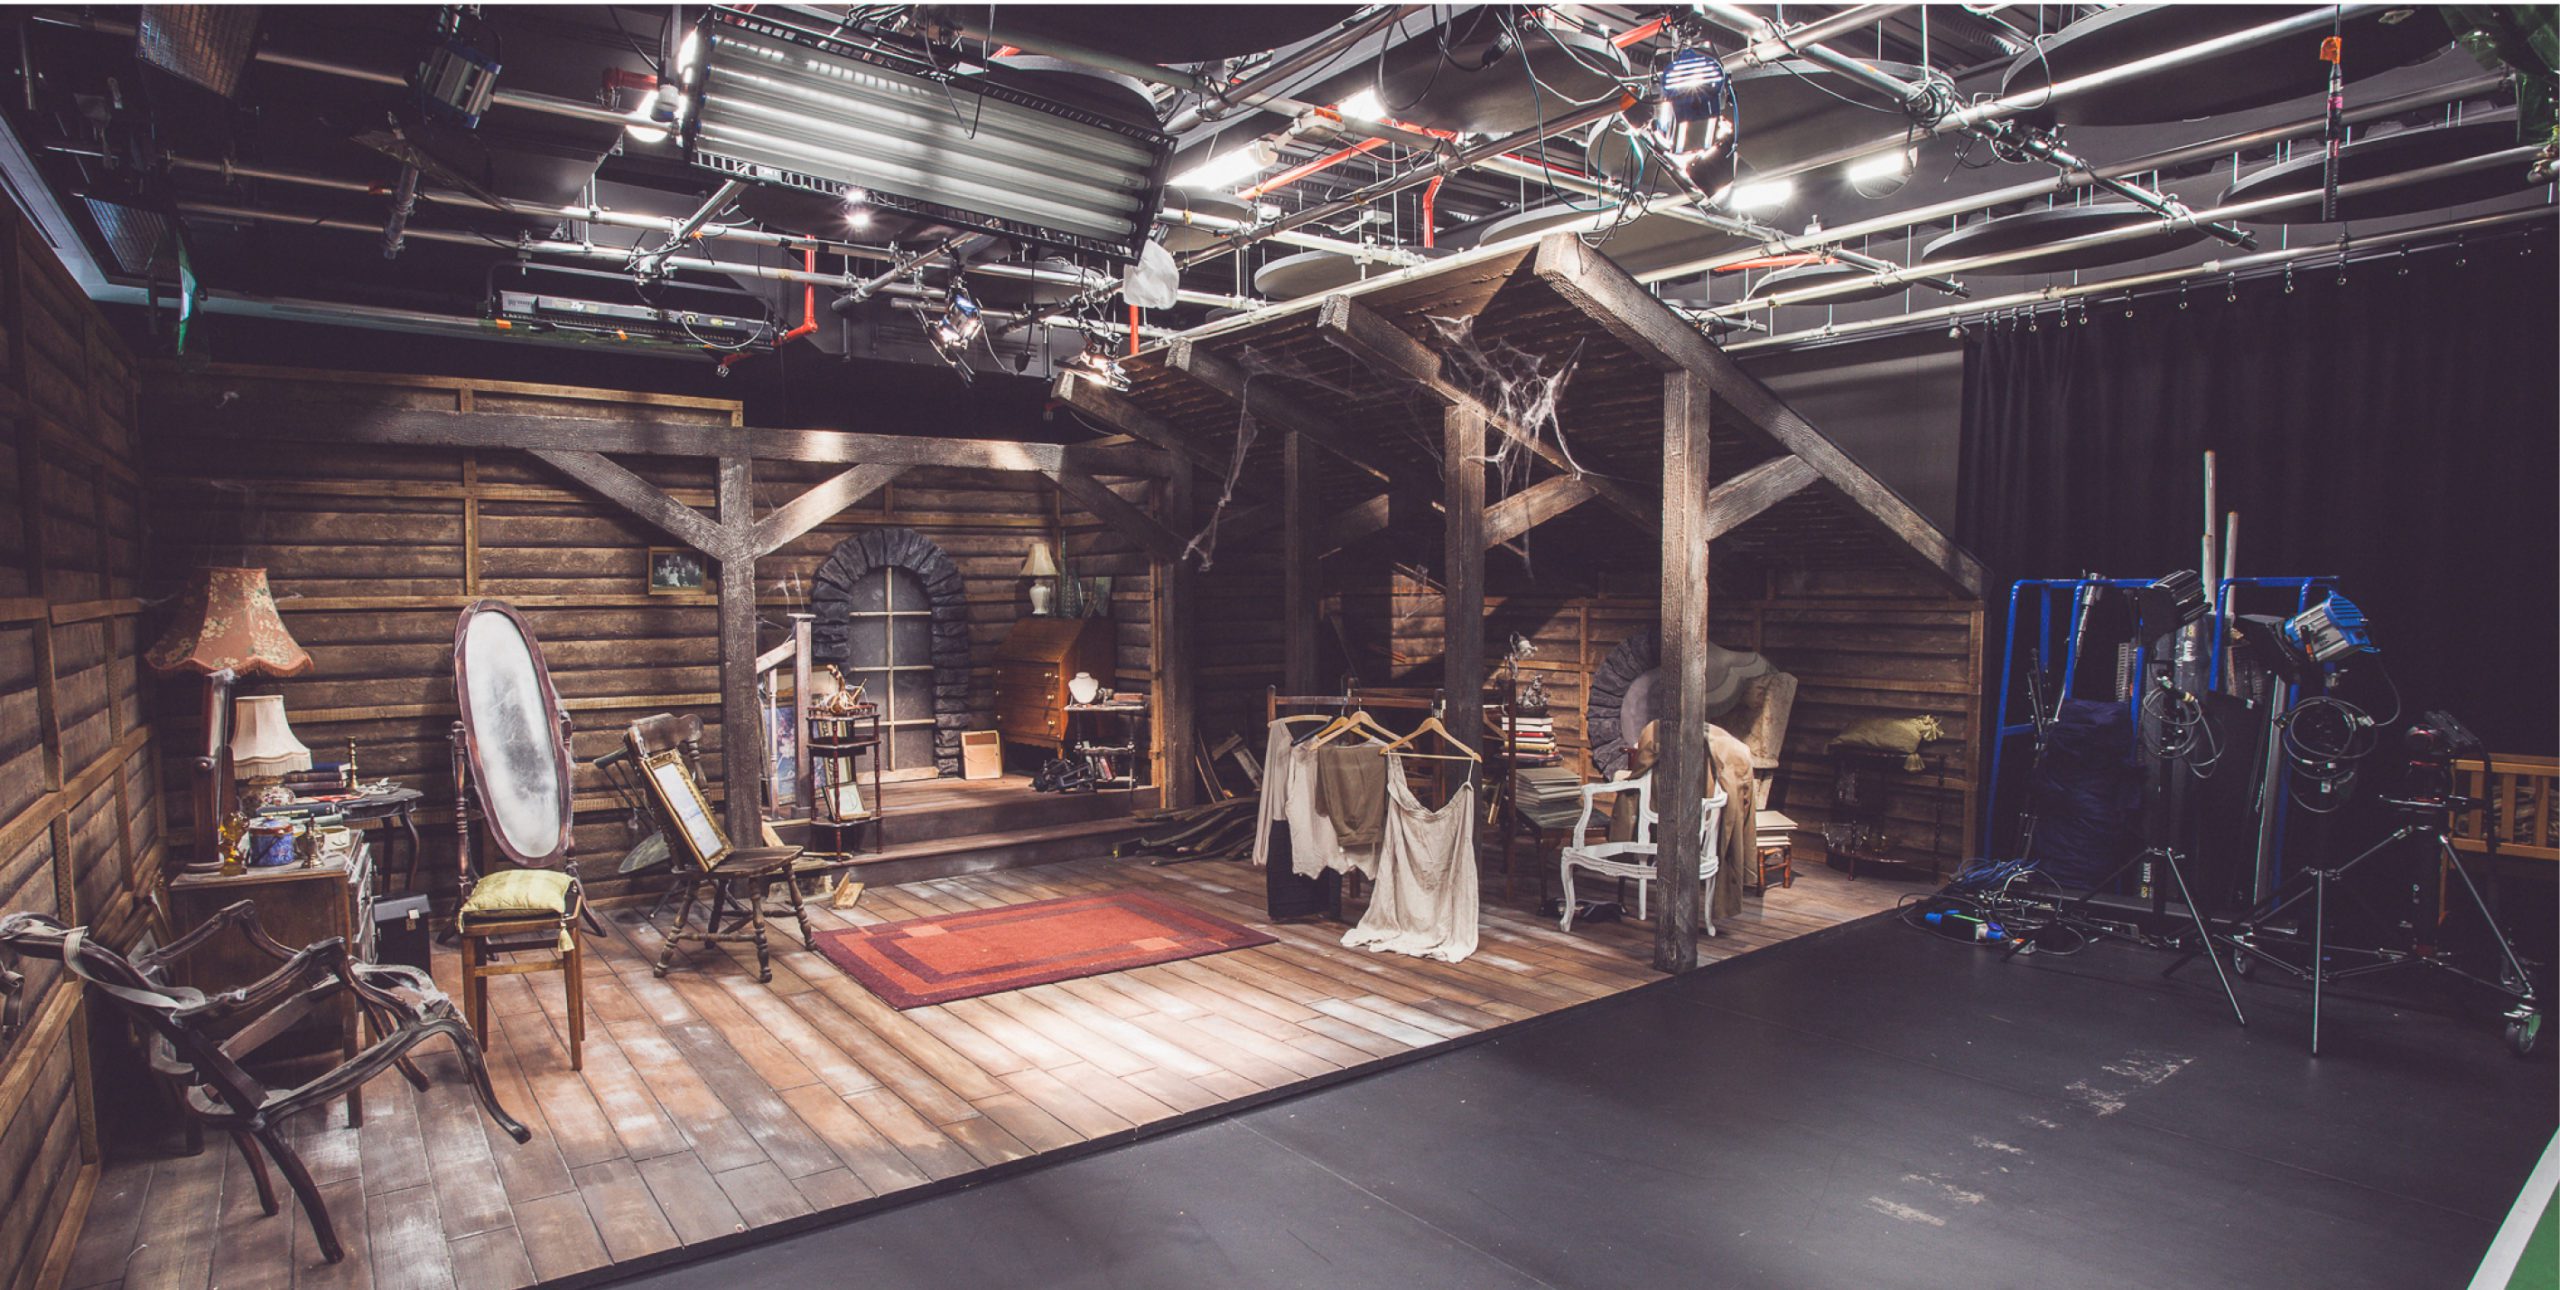 A set on a stage for a room that includes chairs, a mirror, a carpet and clothing